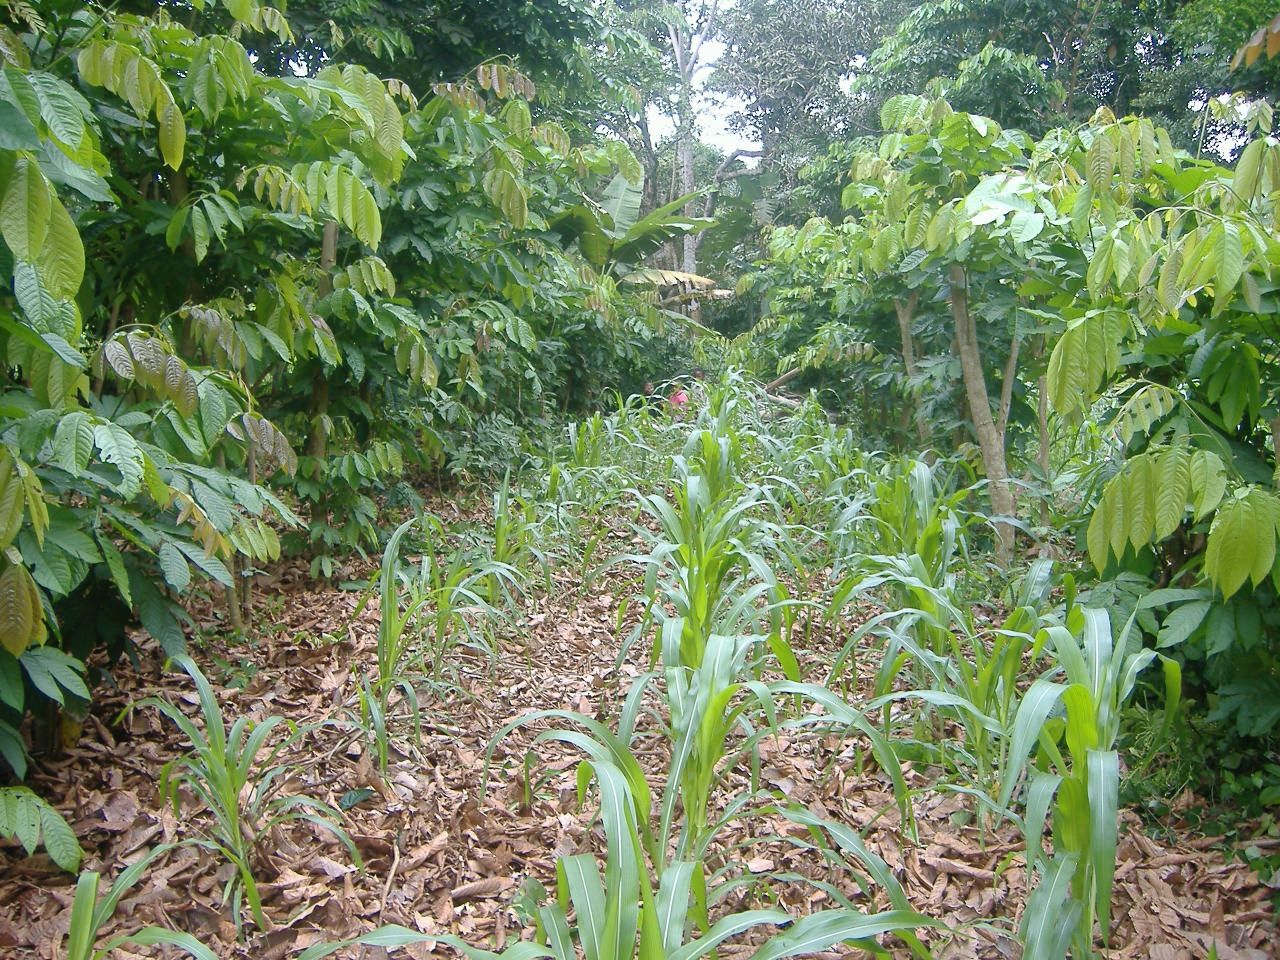 Young maize growing in an Inga alley.